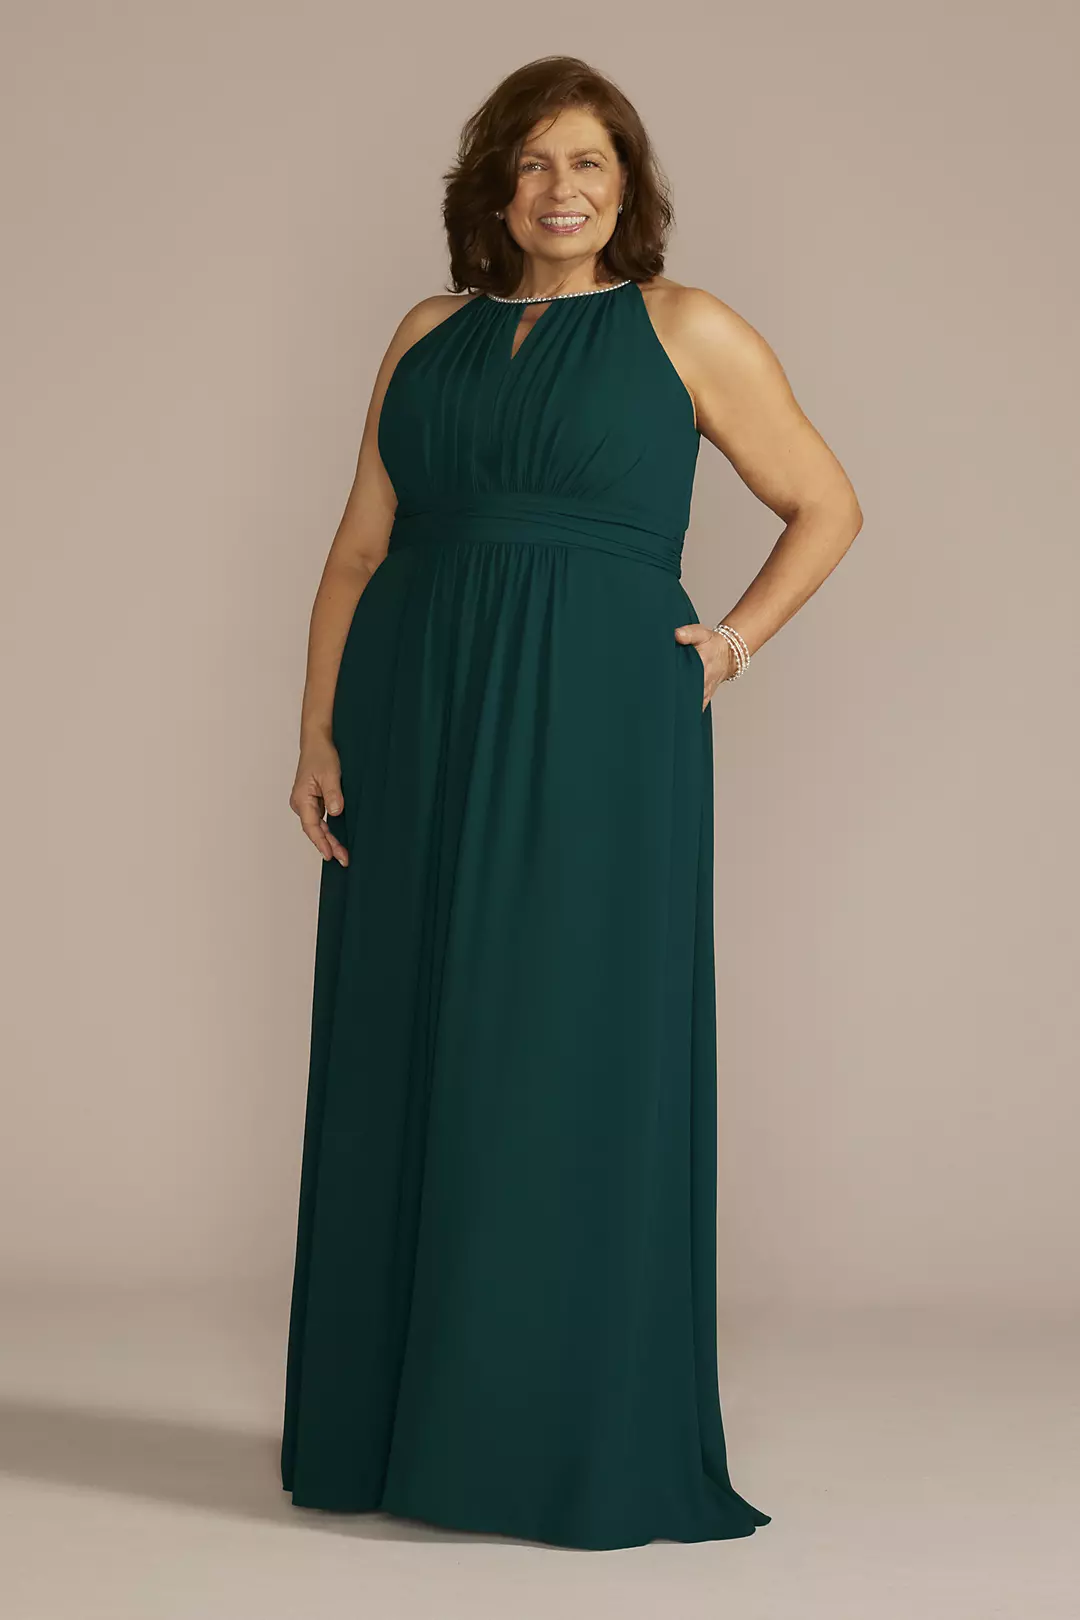 Georgette Gown with Keyhole and Jeweled Neckline Image 1